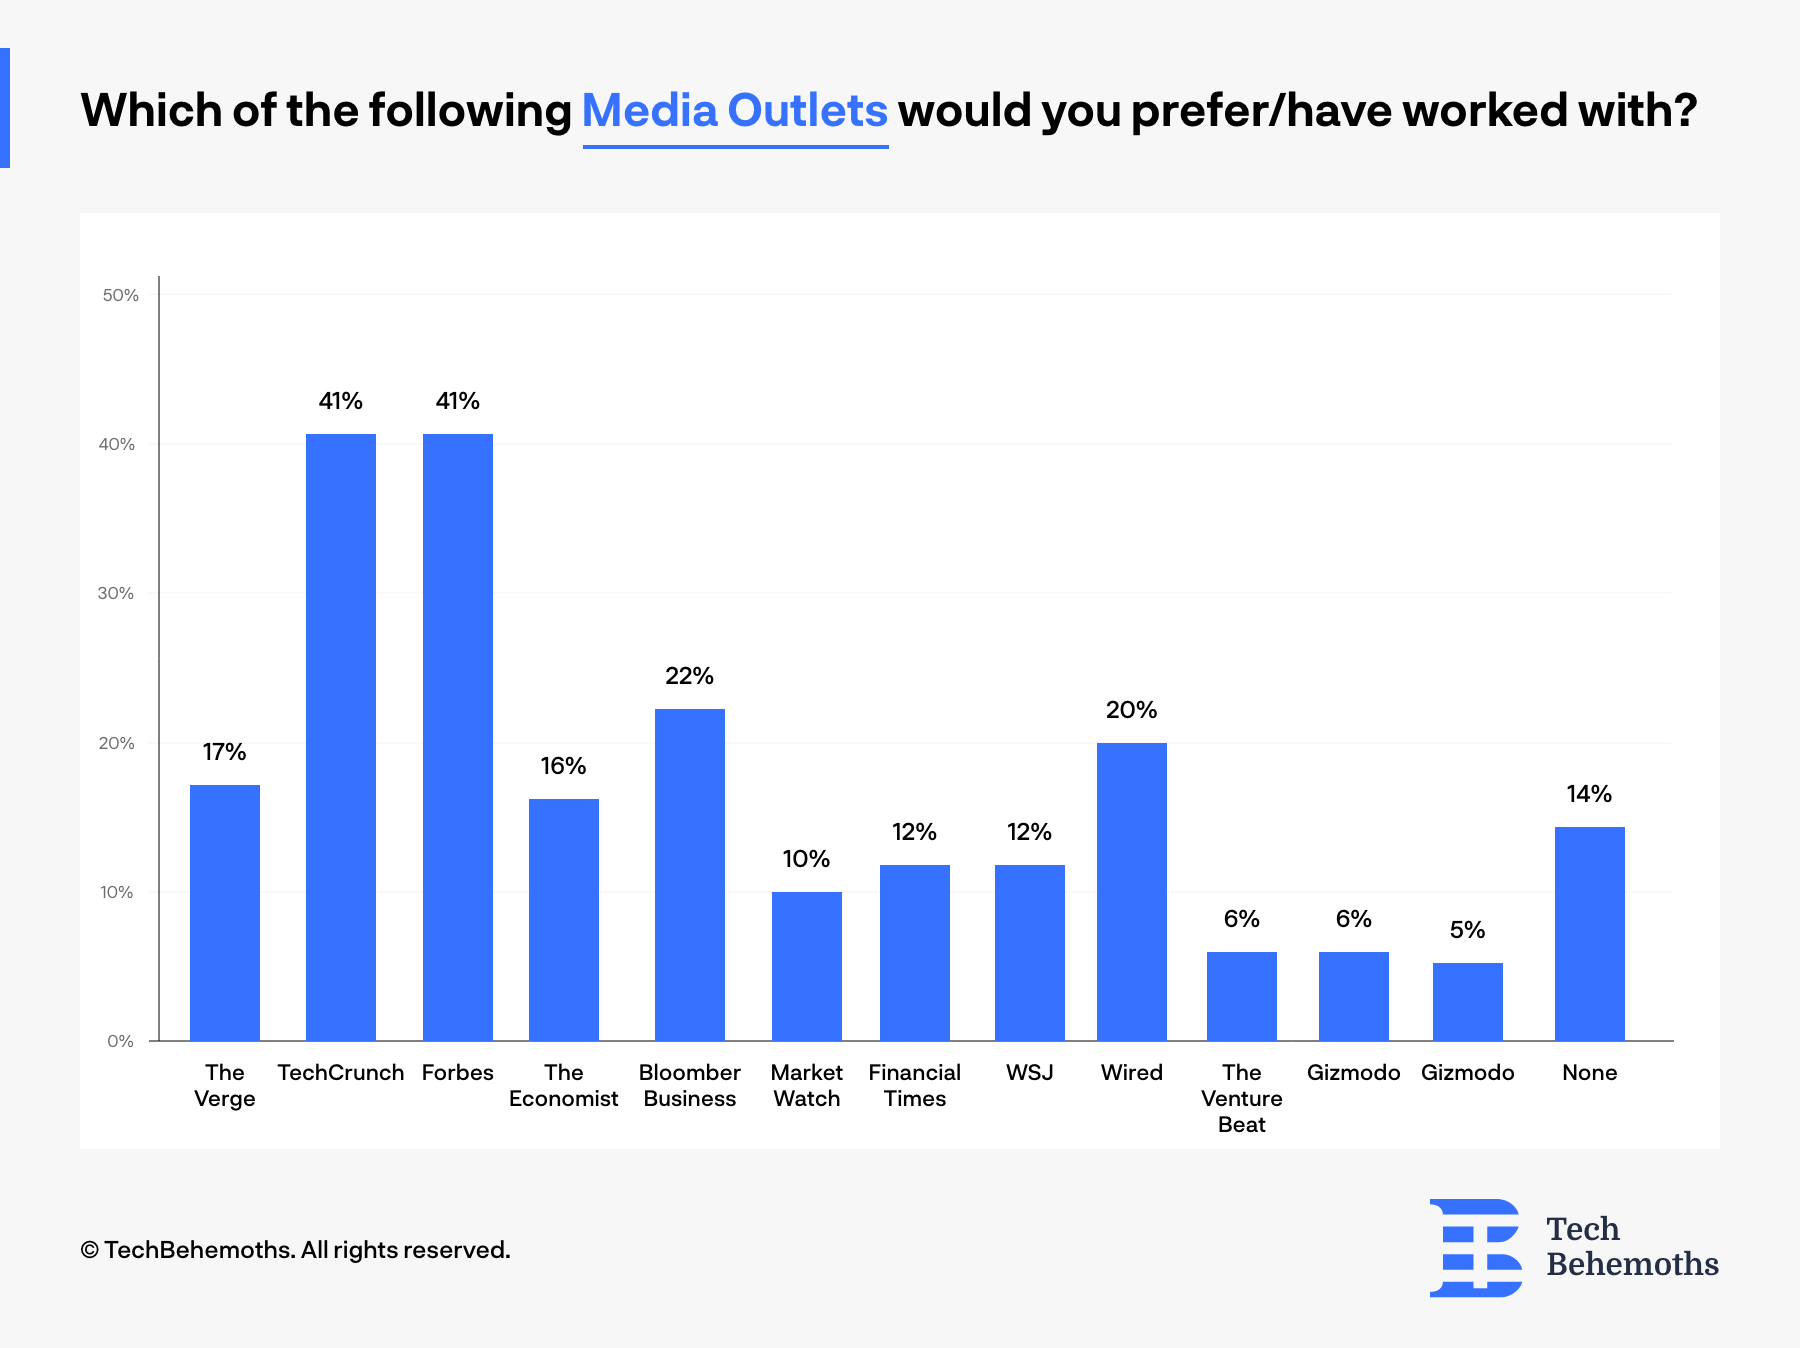 41% of survey respondents would prefer to work with Forbes & TechCrunch, while the least popular is Gizmodo - with 5%